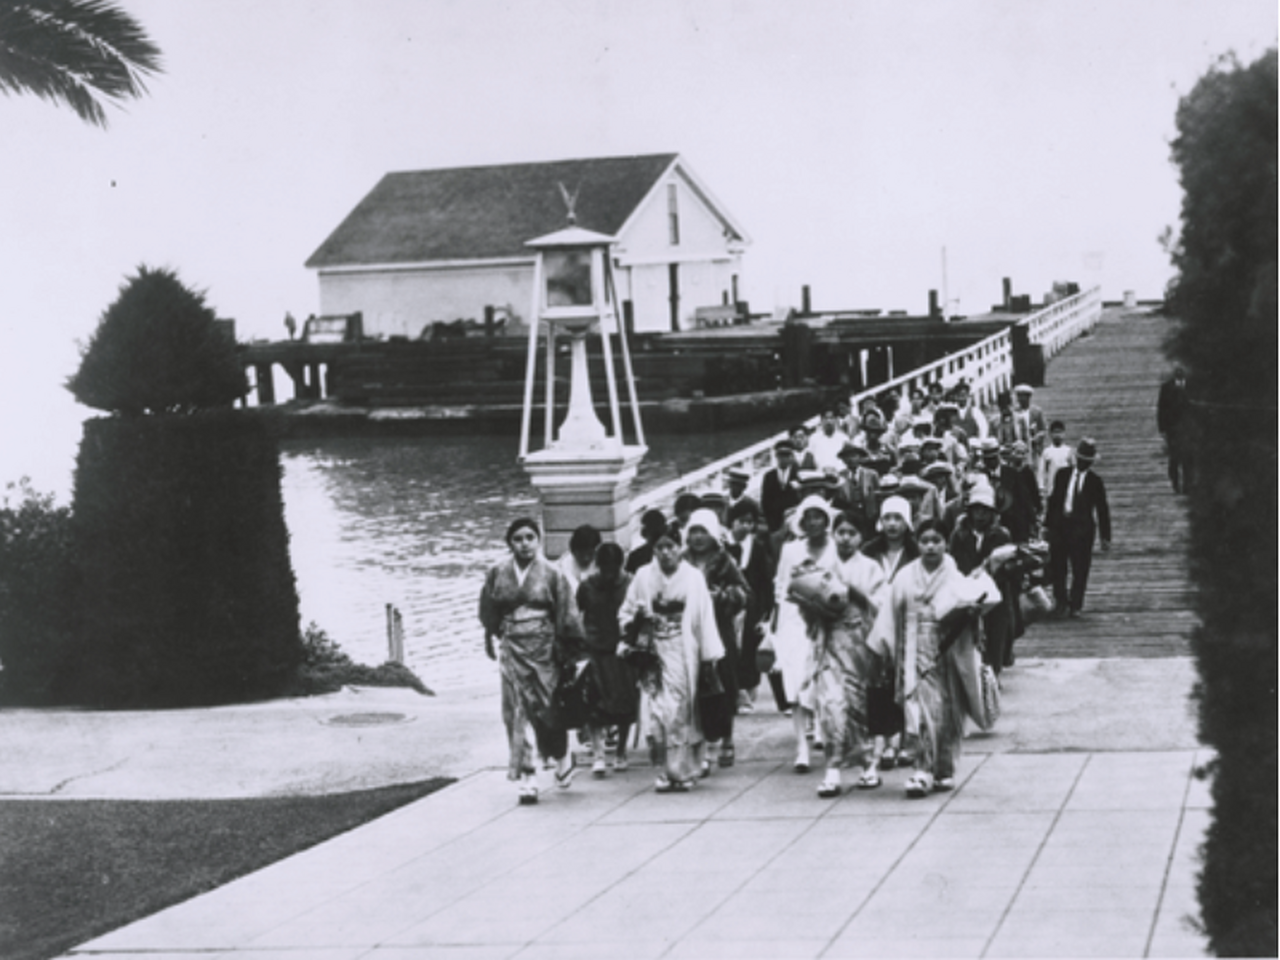 A group of immigrants arriving at Angel Island.